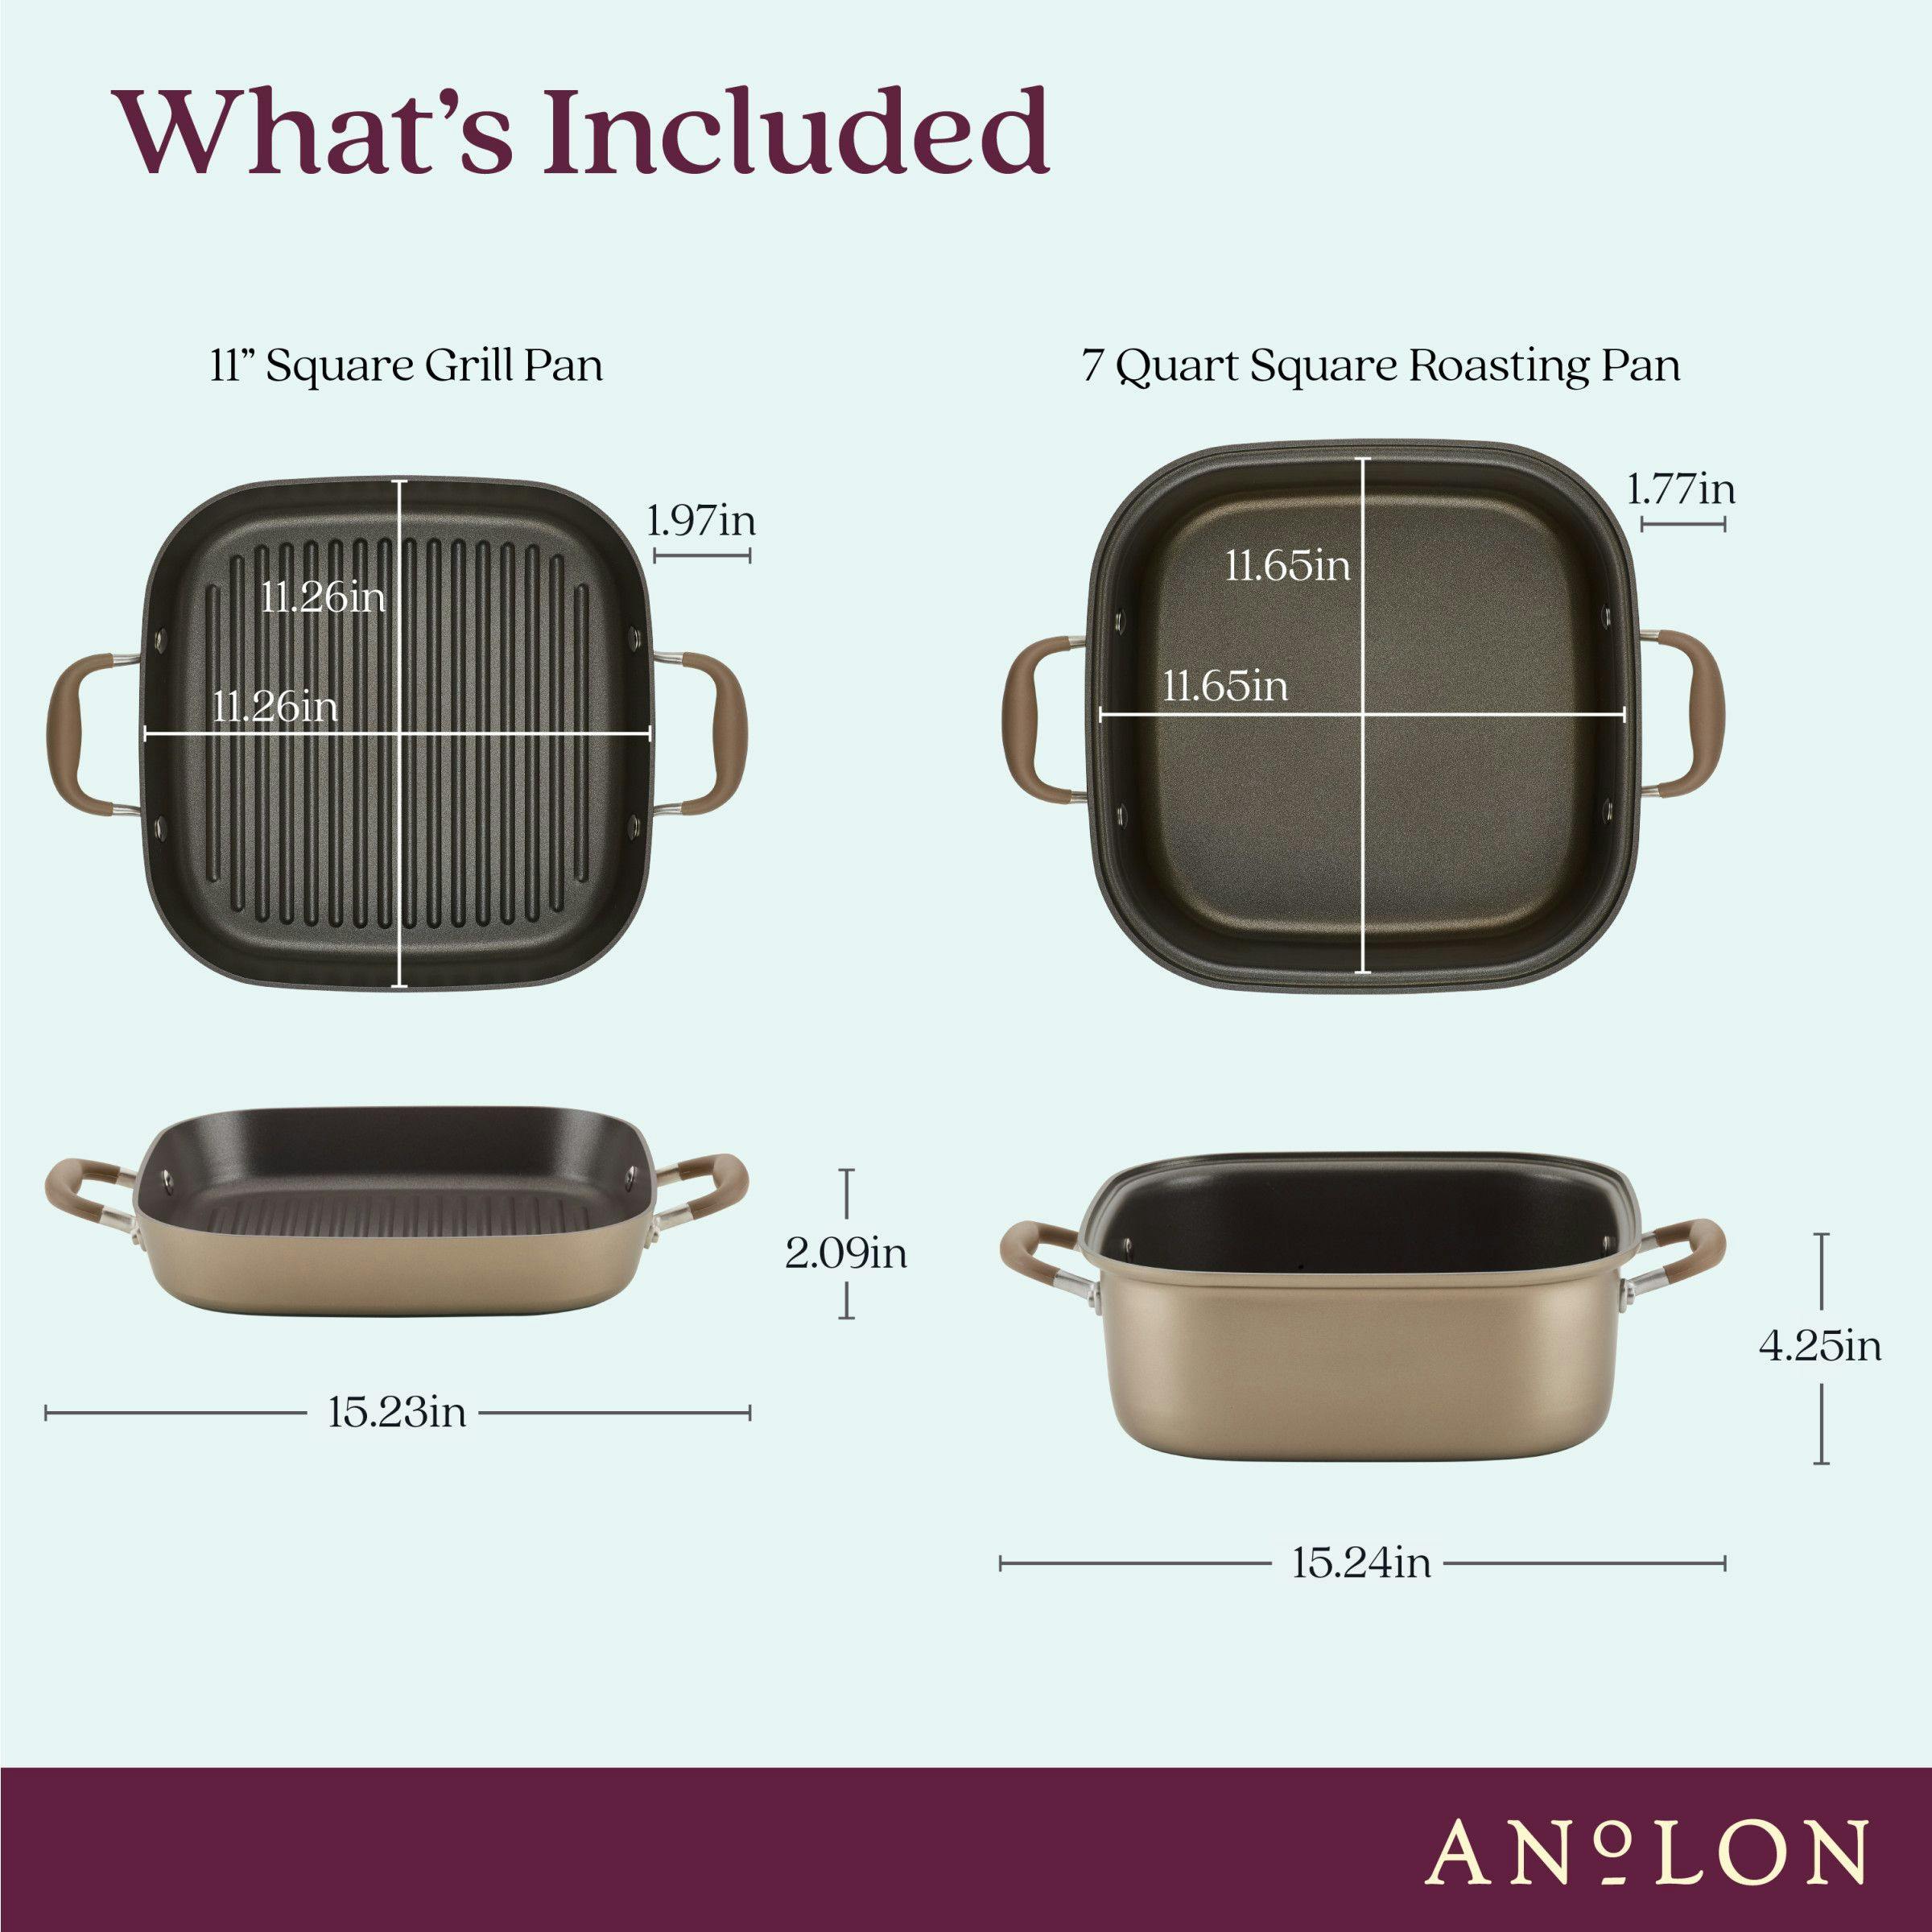 Anolon Advanced Home Hard-Anodized Nonstick Two Step Meal Cookware Set, 2-Piece